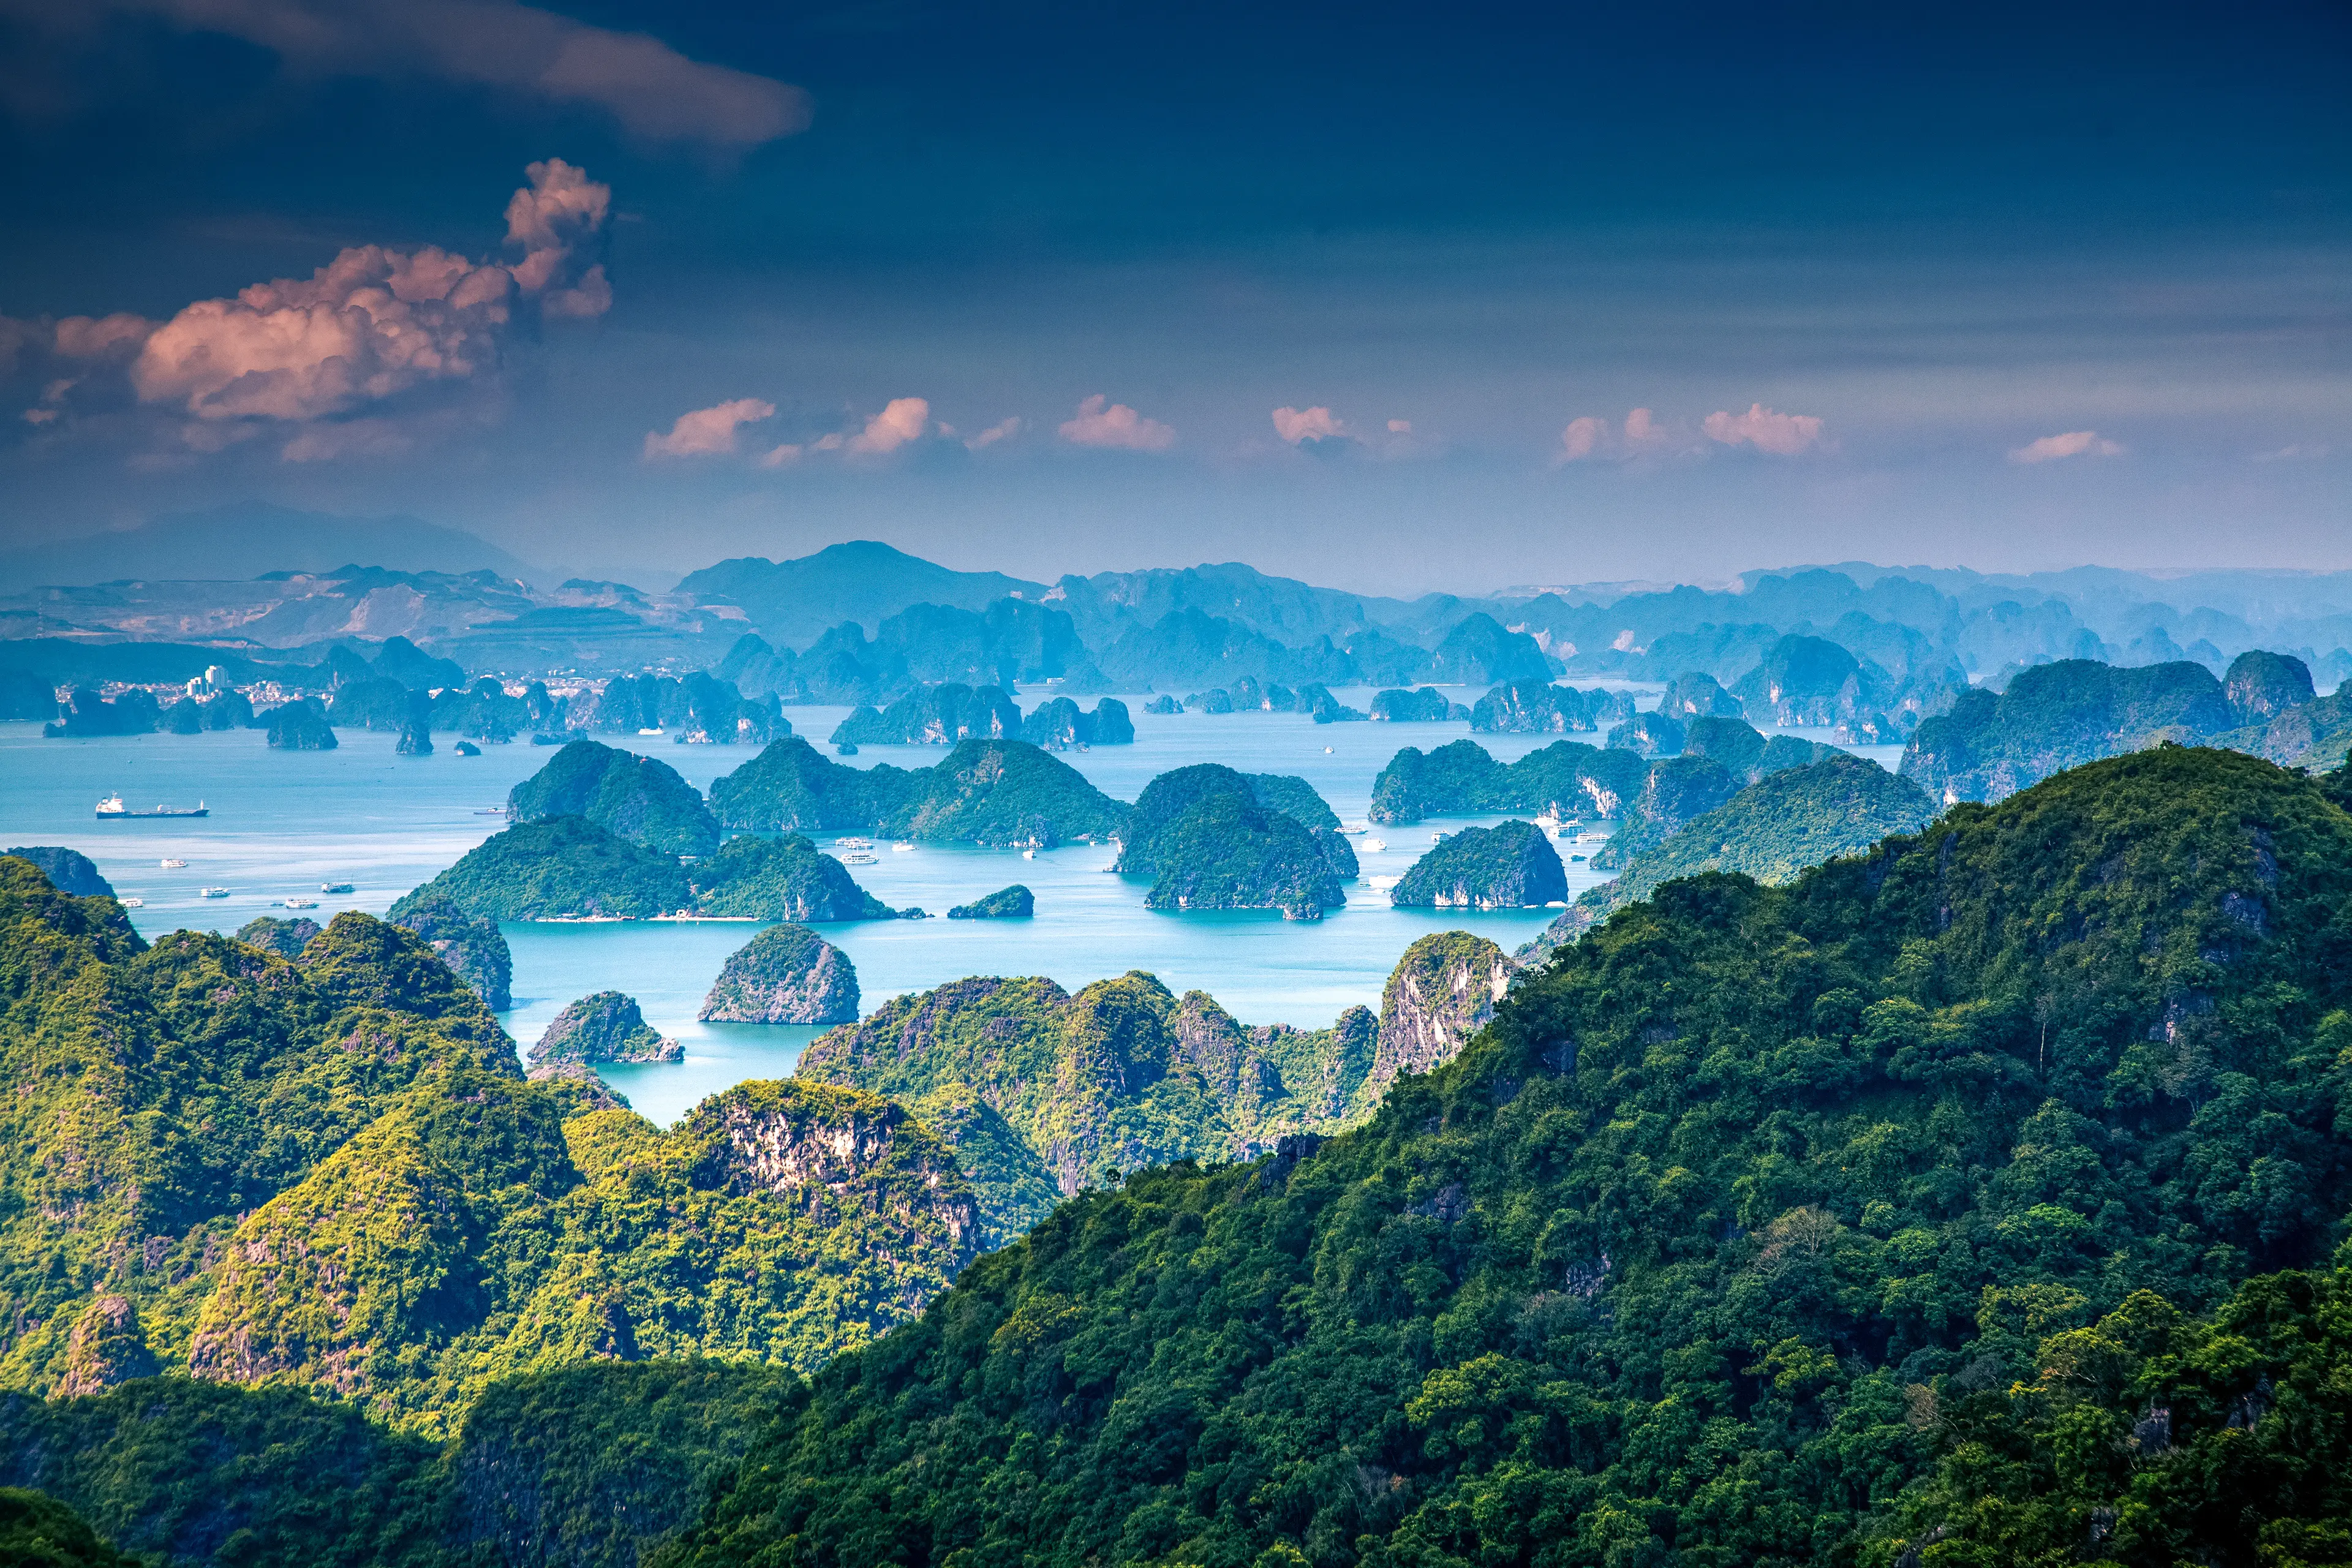 4-Day Family Adventure Off-the-Beaten-Path in Ha Long Bay